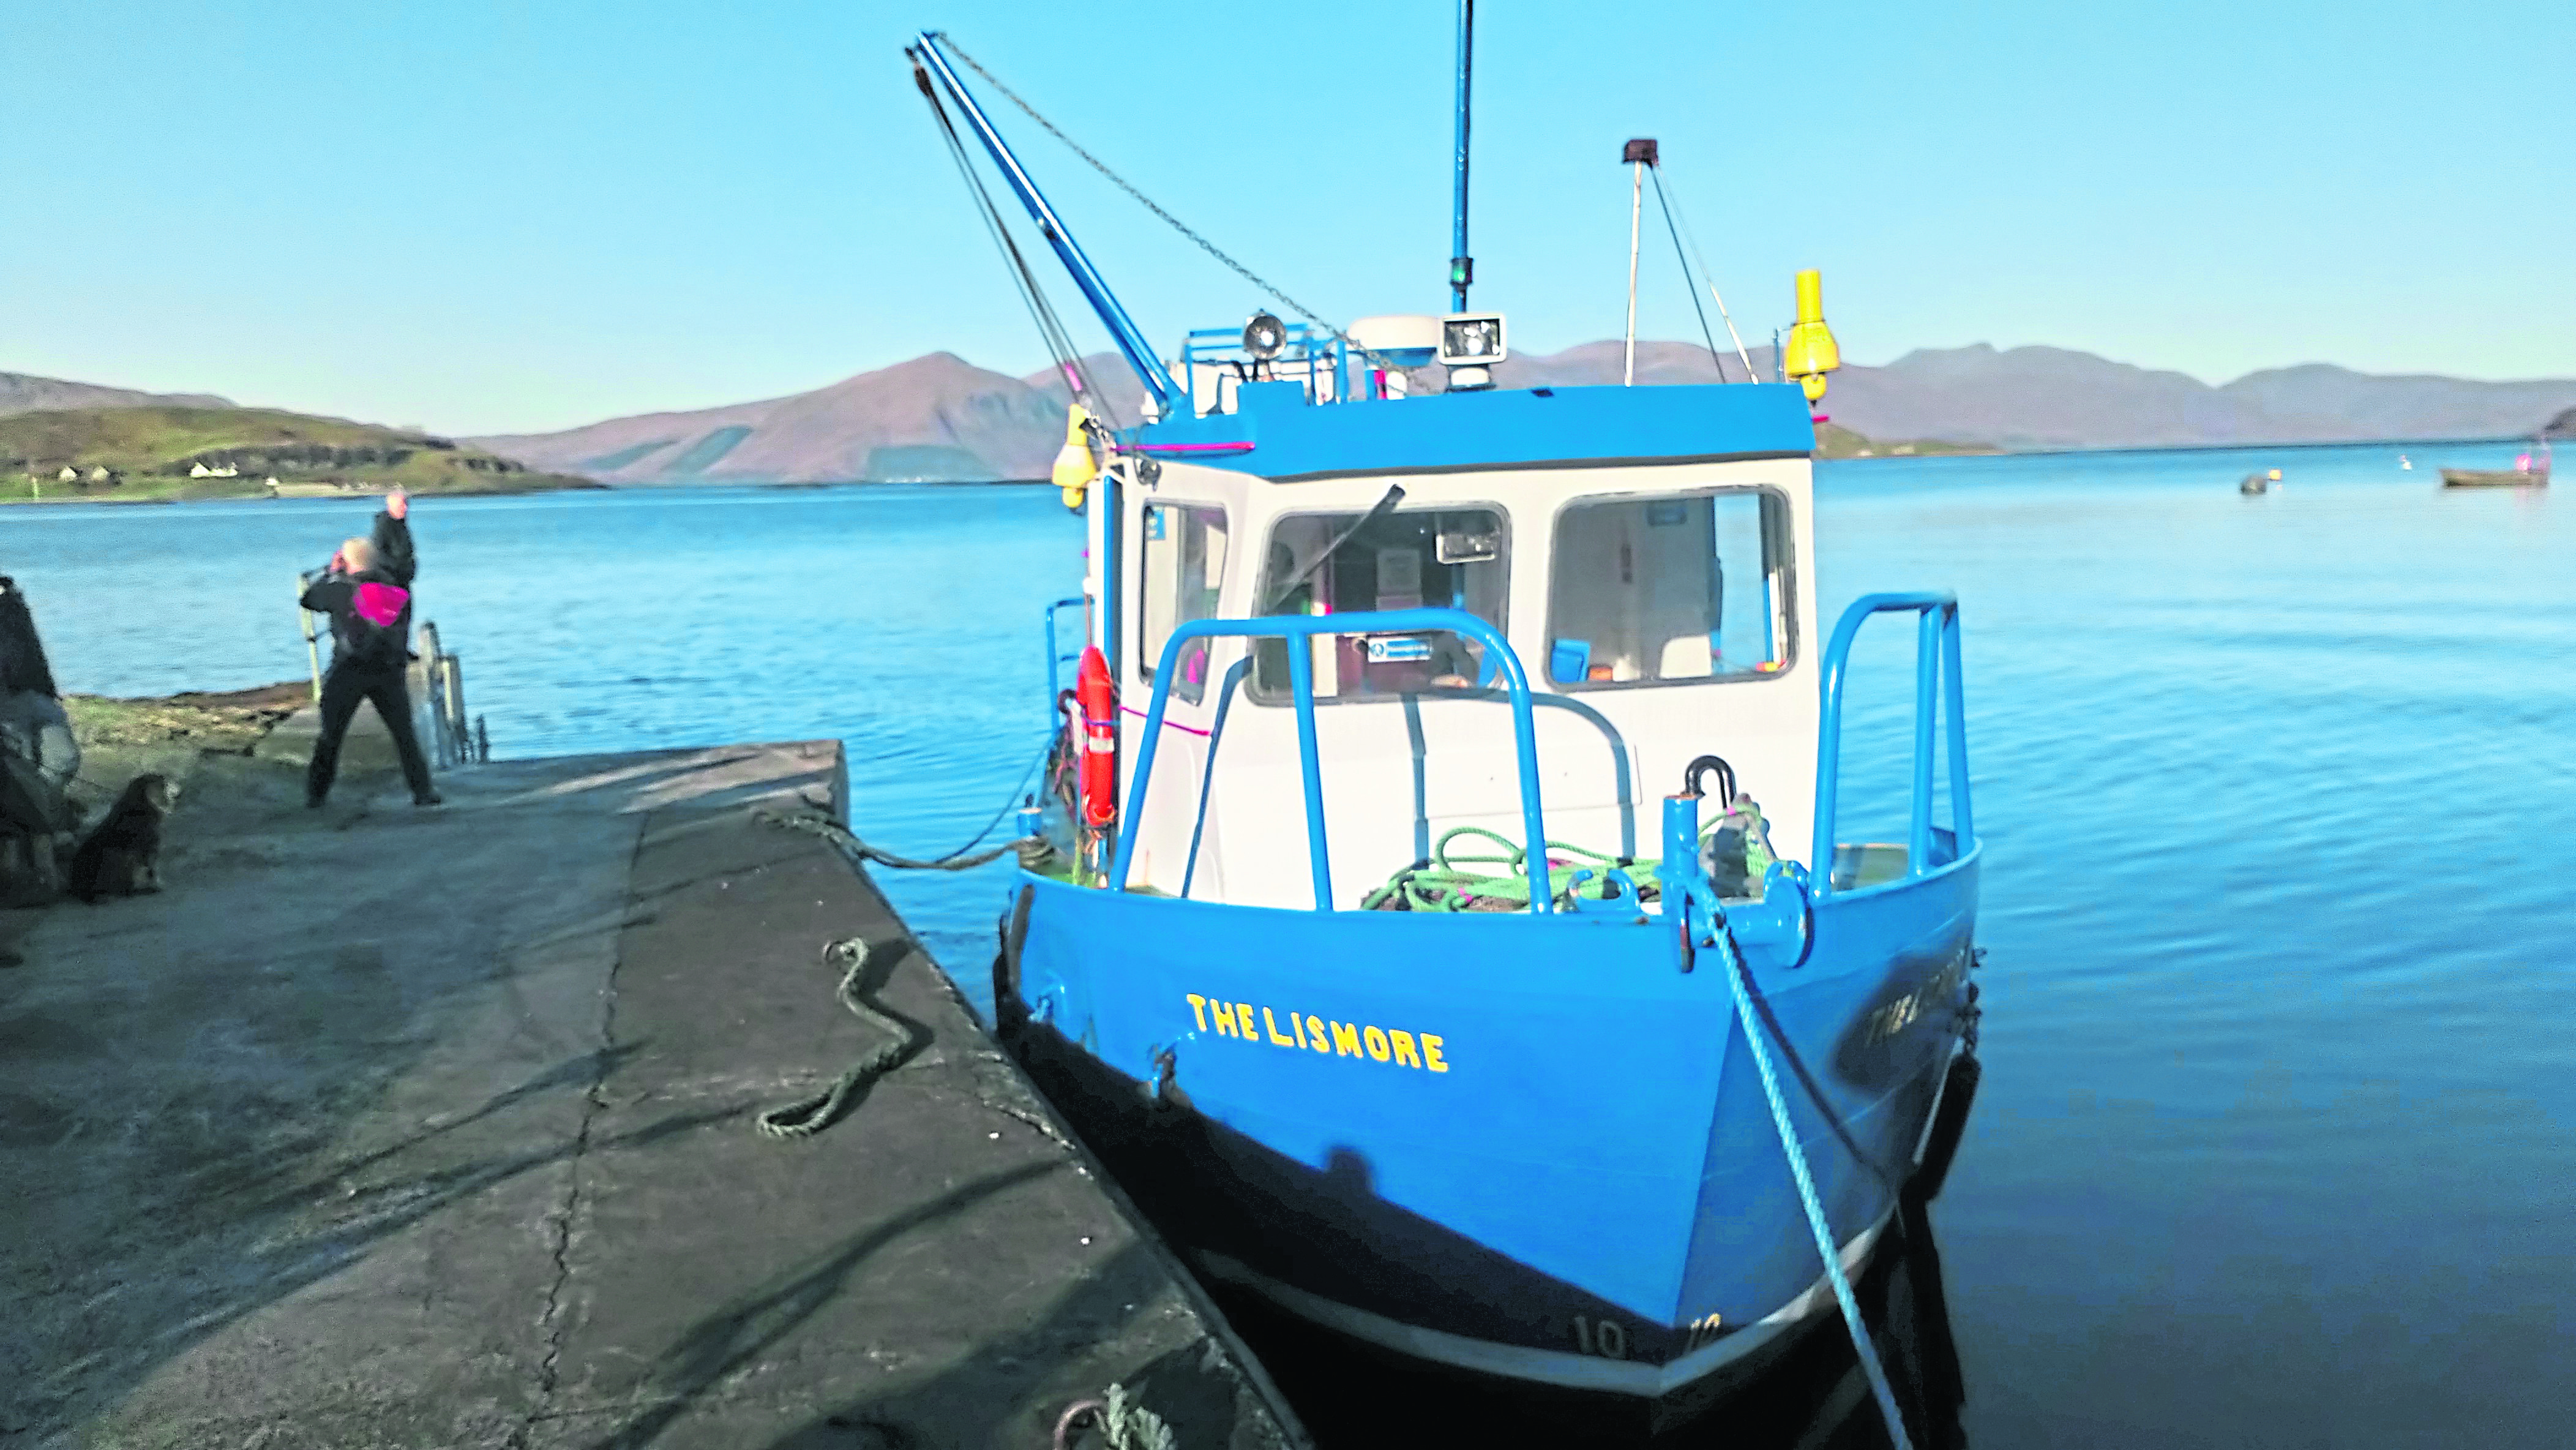 The Lismore Ferry will be the first to be replaced in Argyll and Bute.